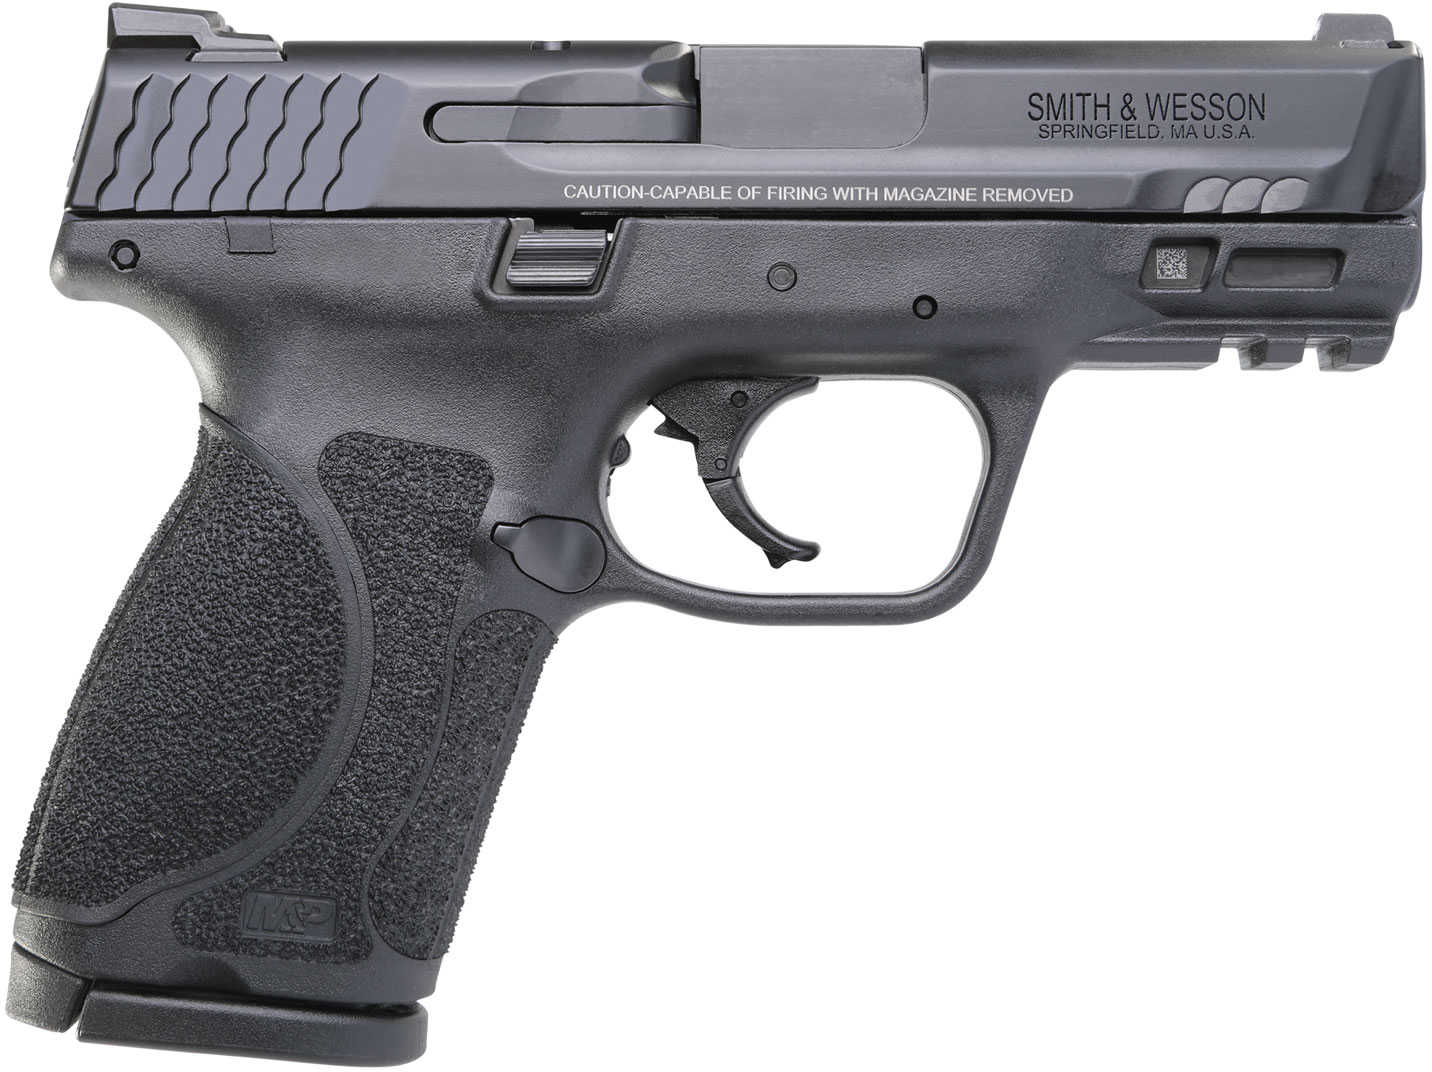 Smith & Wesson M&P M2.0 Compact Pistol 9mm 3.6" Barrel 15 Round Black Armornite Stainless Steel Slide Interchangeable Backstrap Grip